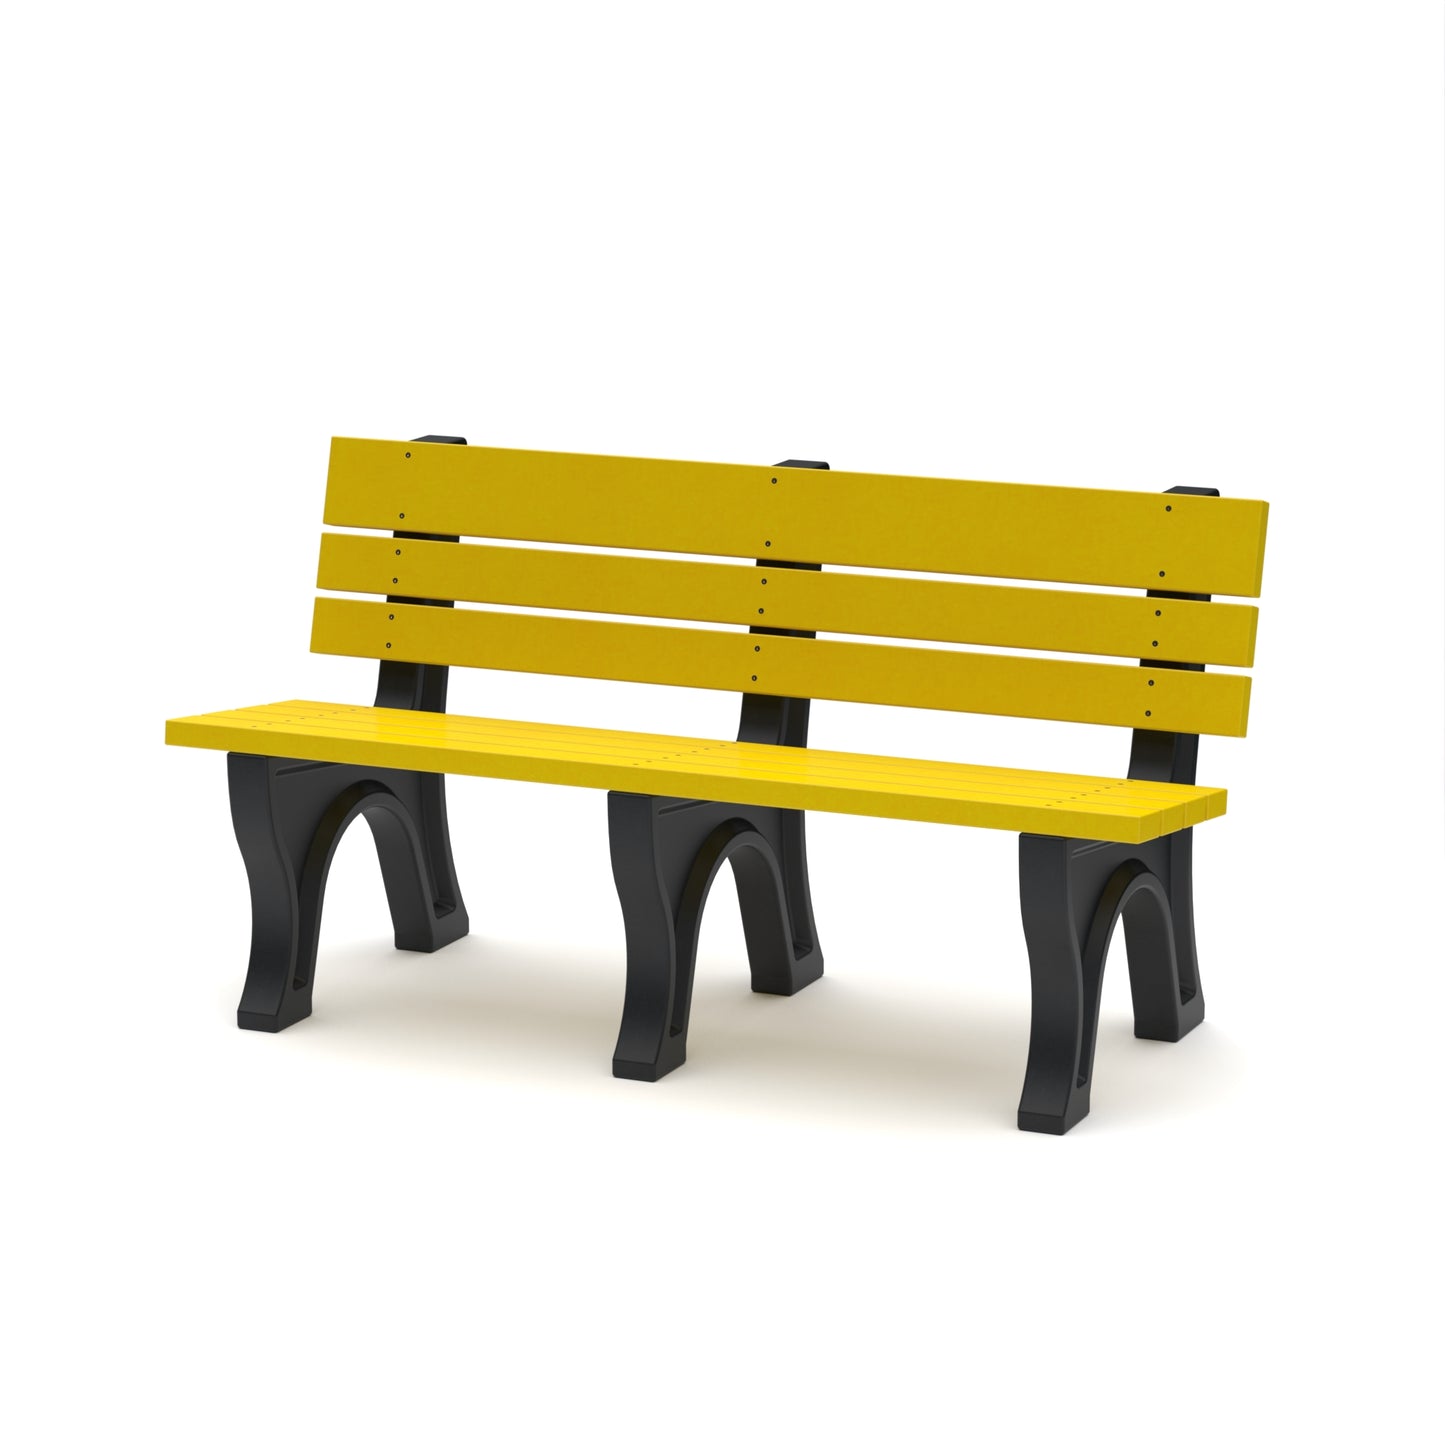 Wildridge Heritage Outdoor Park Bench - LEAD TIME TO SHIP 6 WEEKS OR LESS